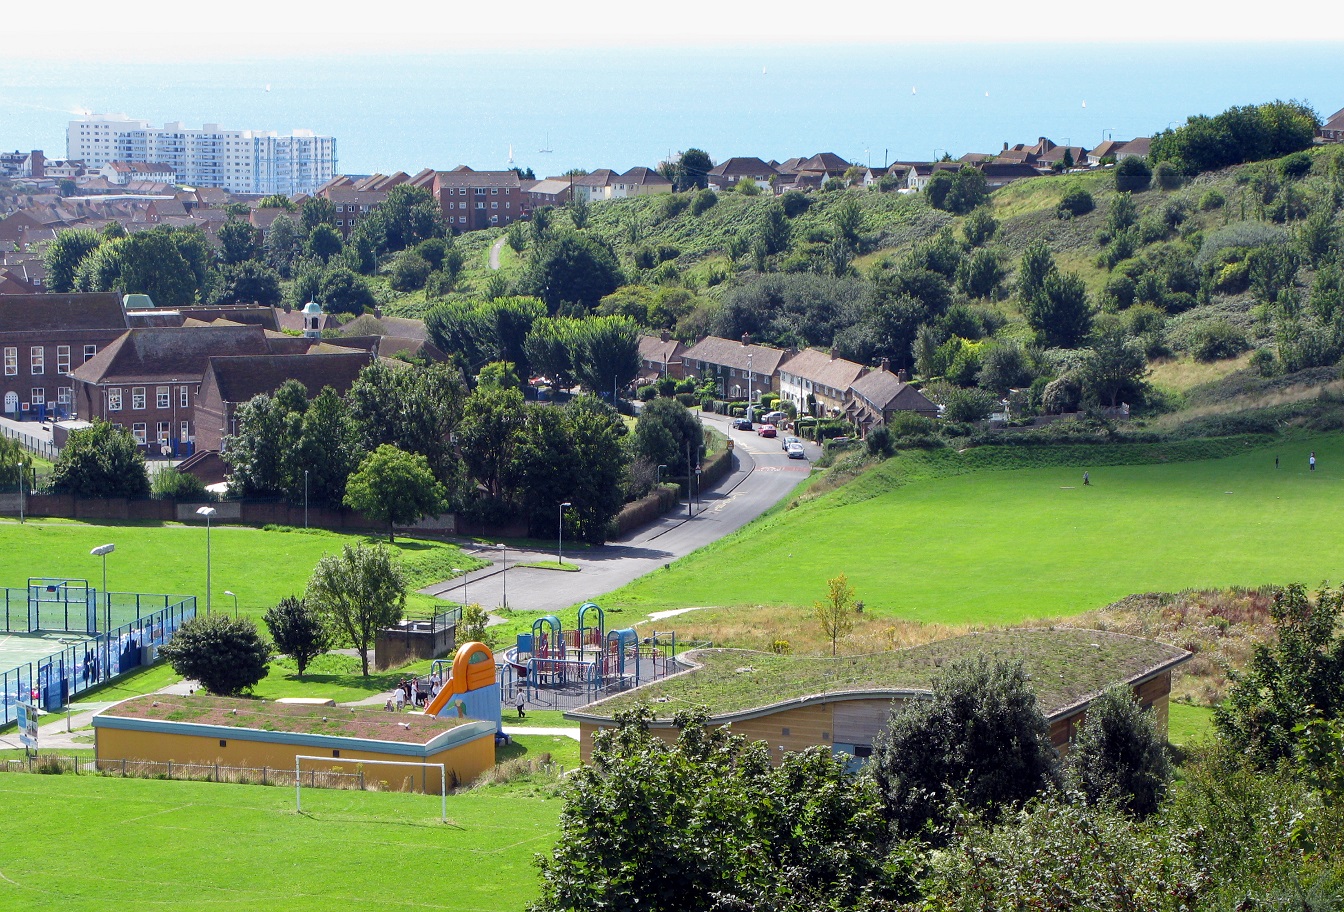 A view of Whitehawk Hill in Brighton. Green space and aplayground area are visible in the middle distance, with housing and then the sea in the background.